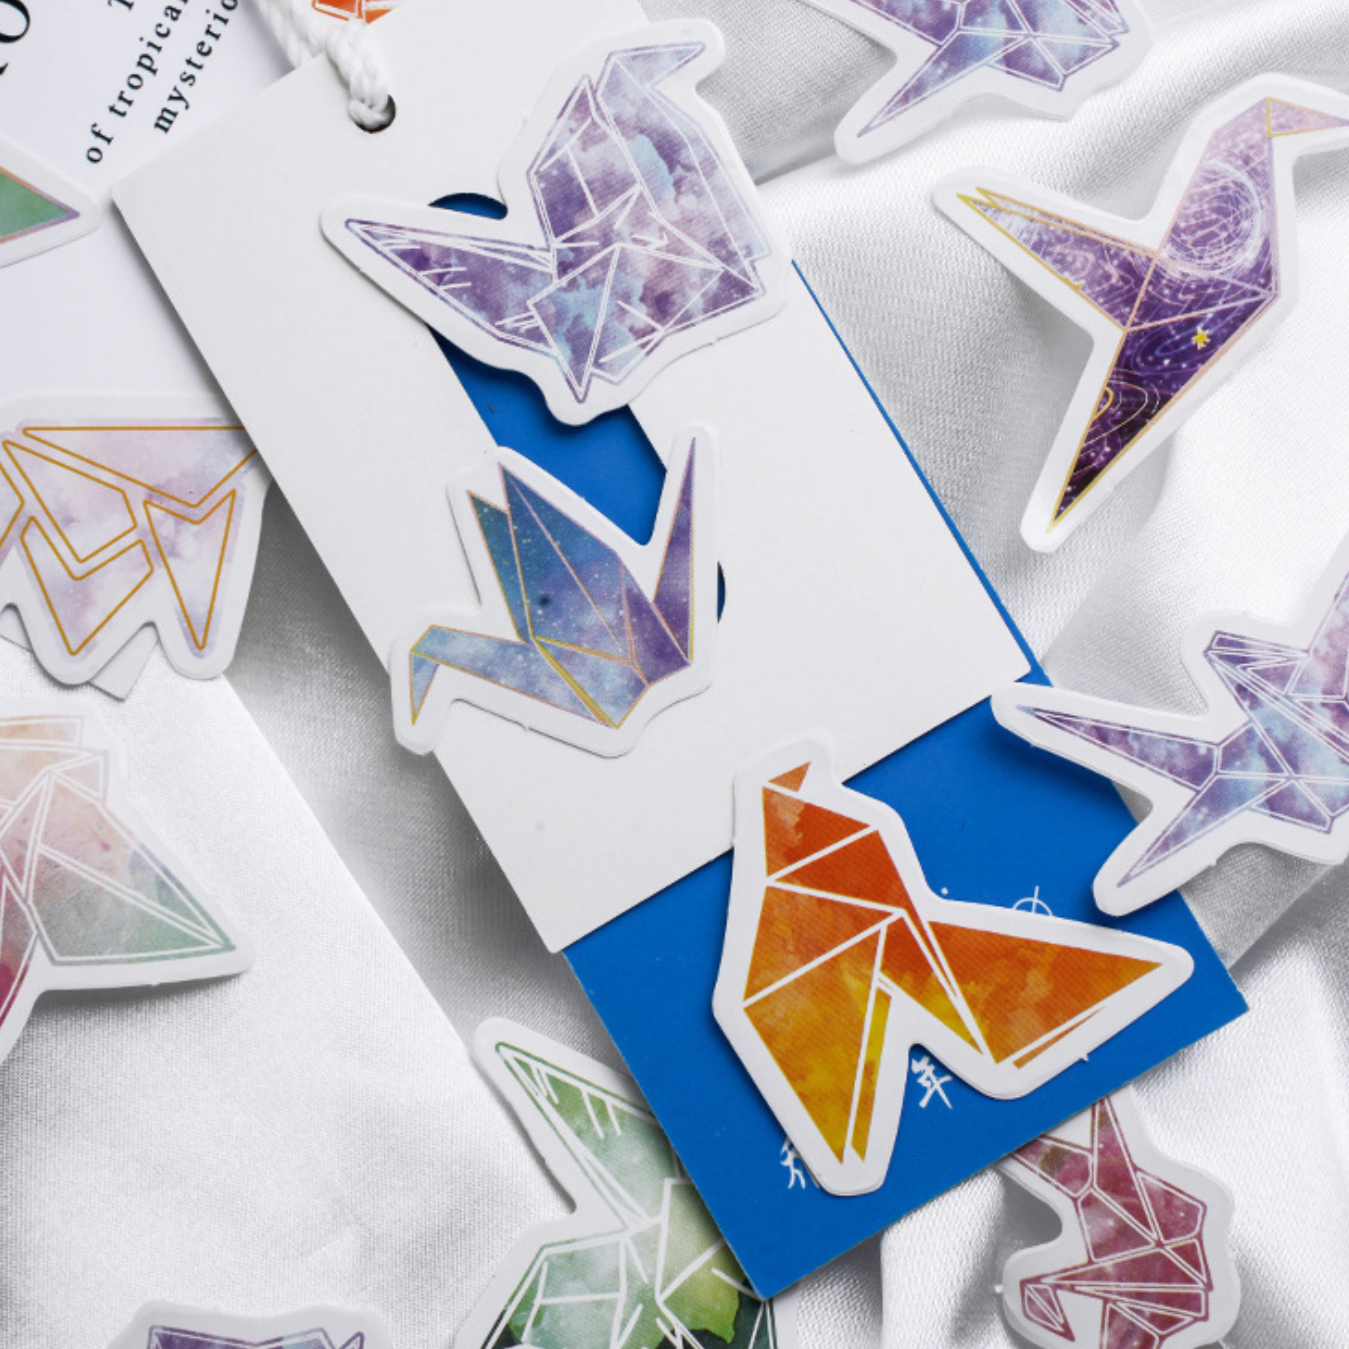 Paper Cranes Stickers - pack of 45